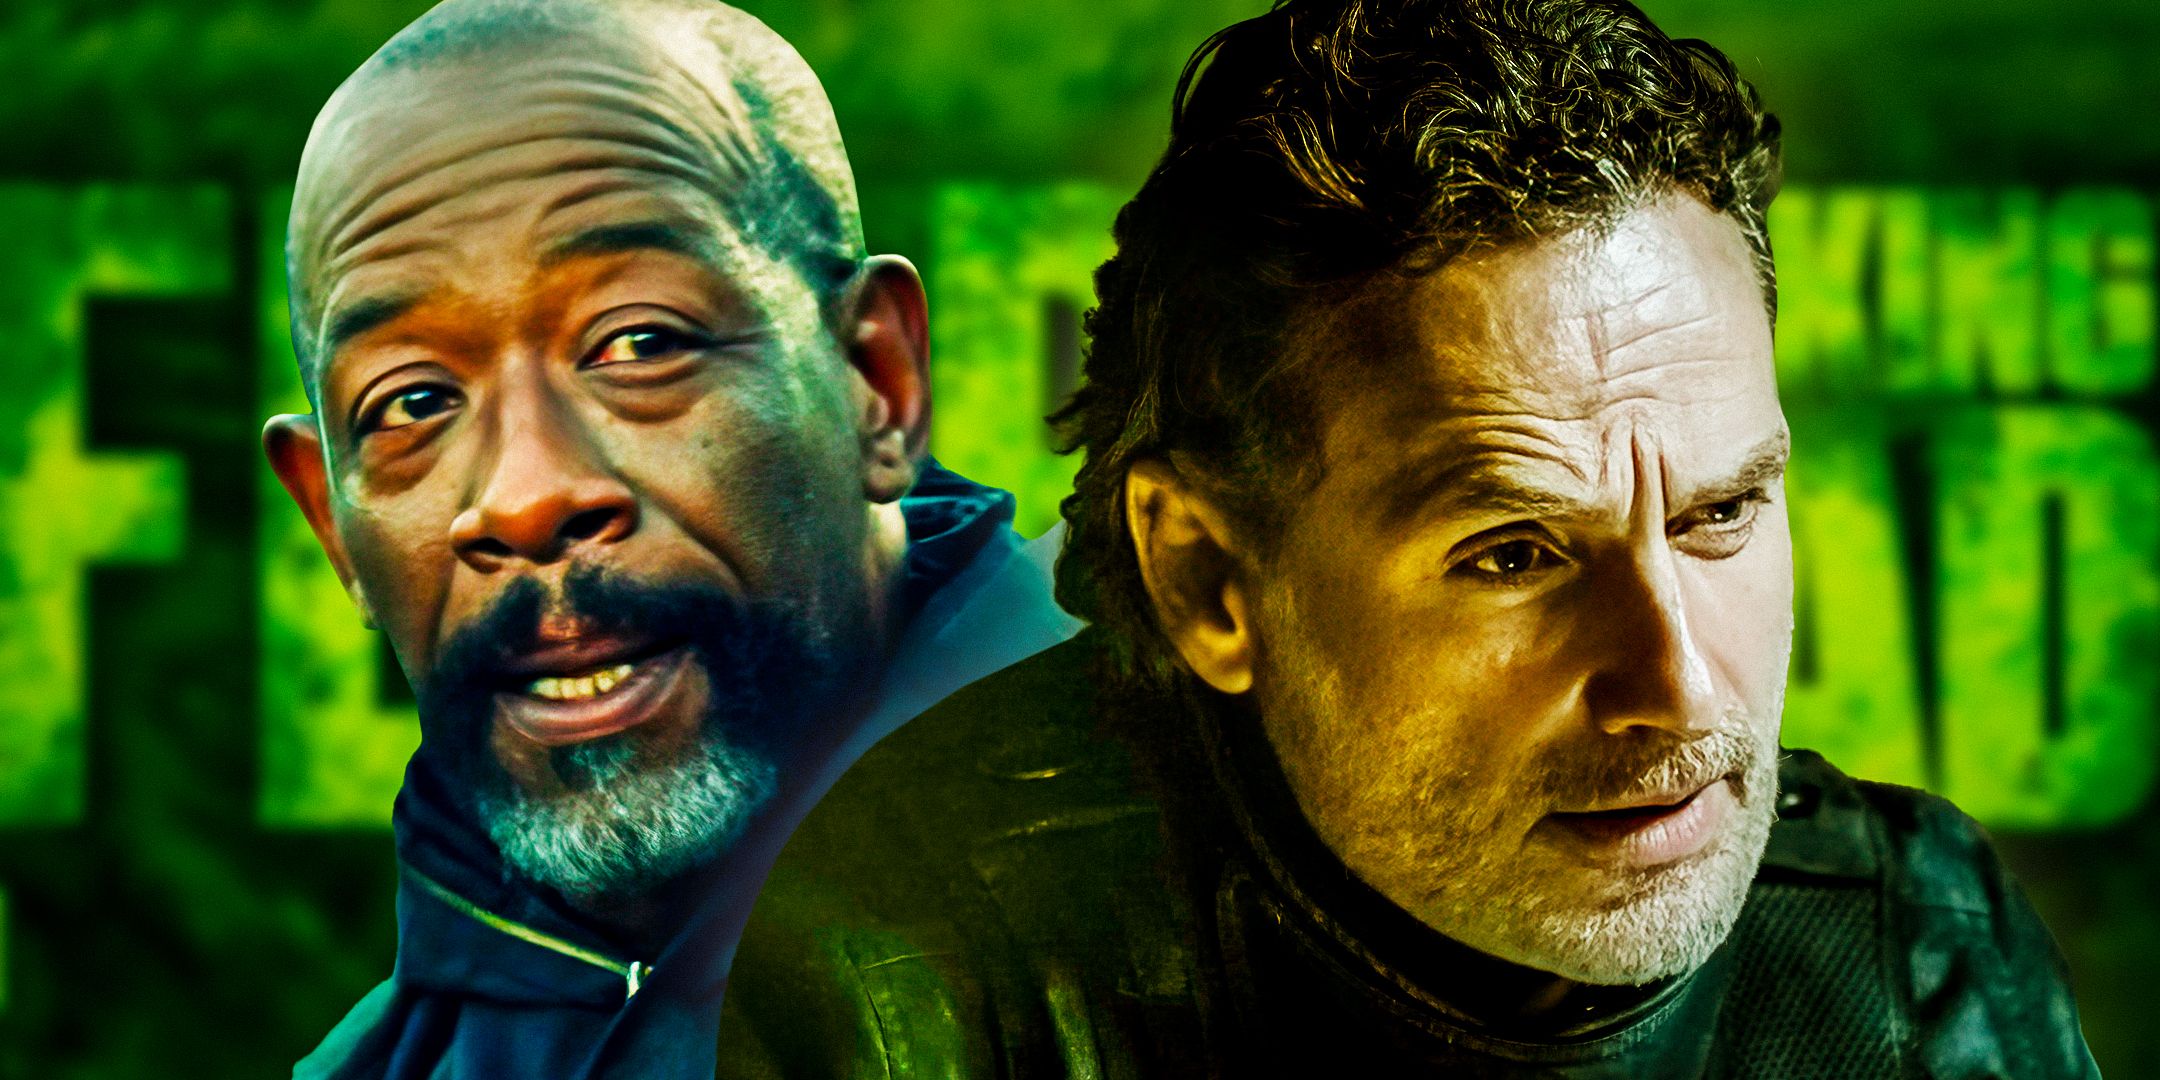 Morgan Jones (Lennie James) and Rick Grimes (Andrew Lincoln) from The Walking Dead